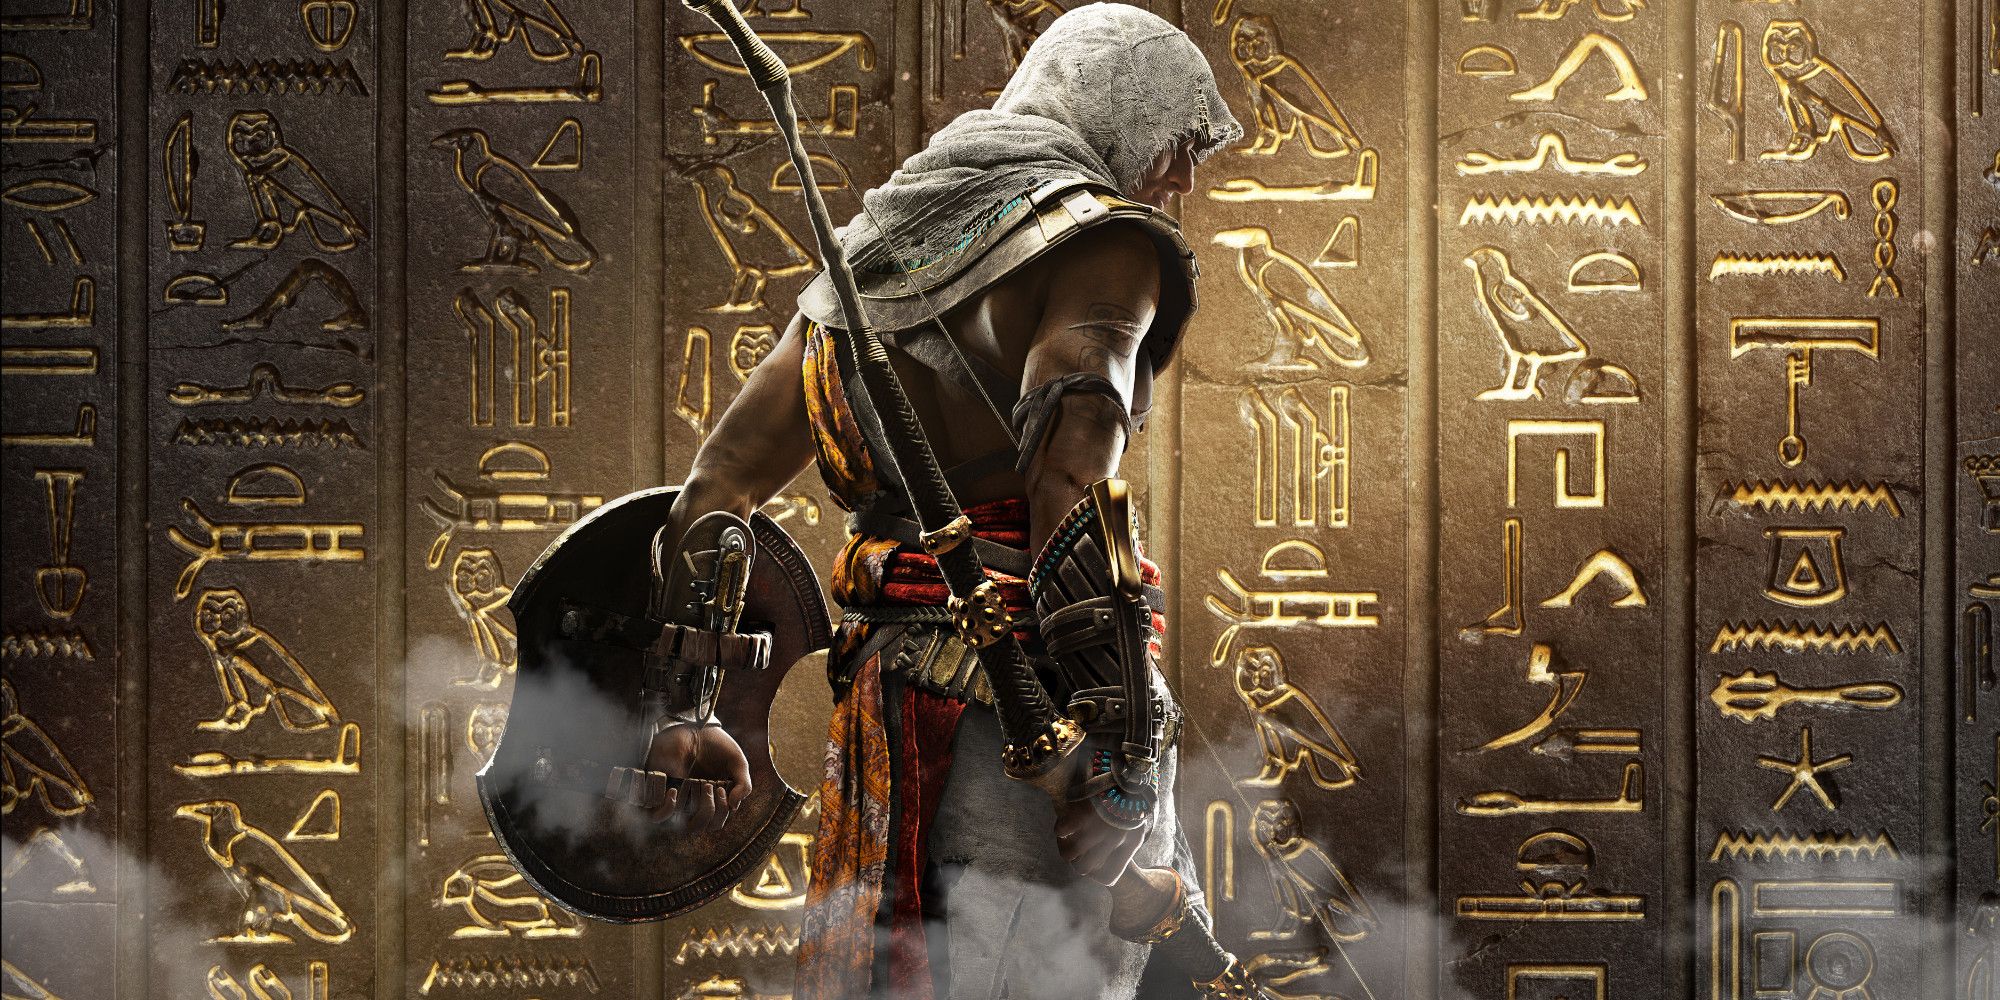 Bayek of Siwa standing with his bow and shield